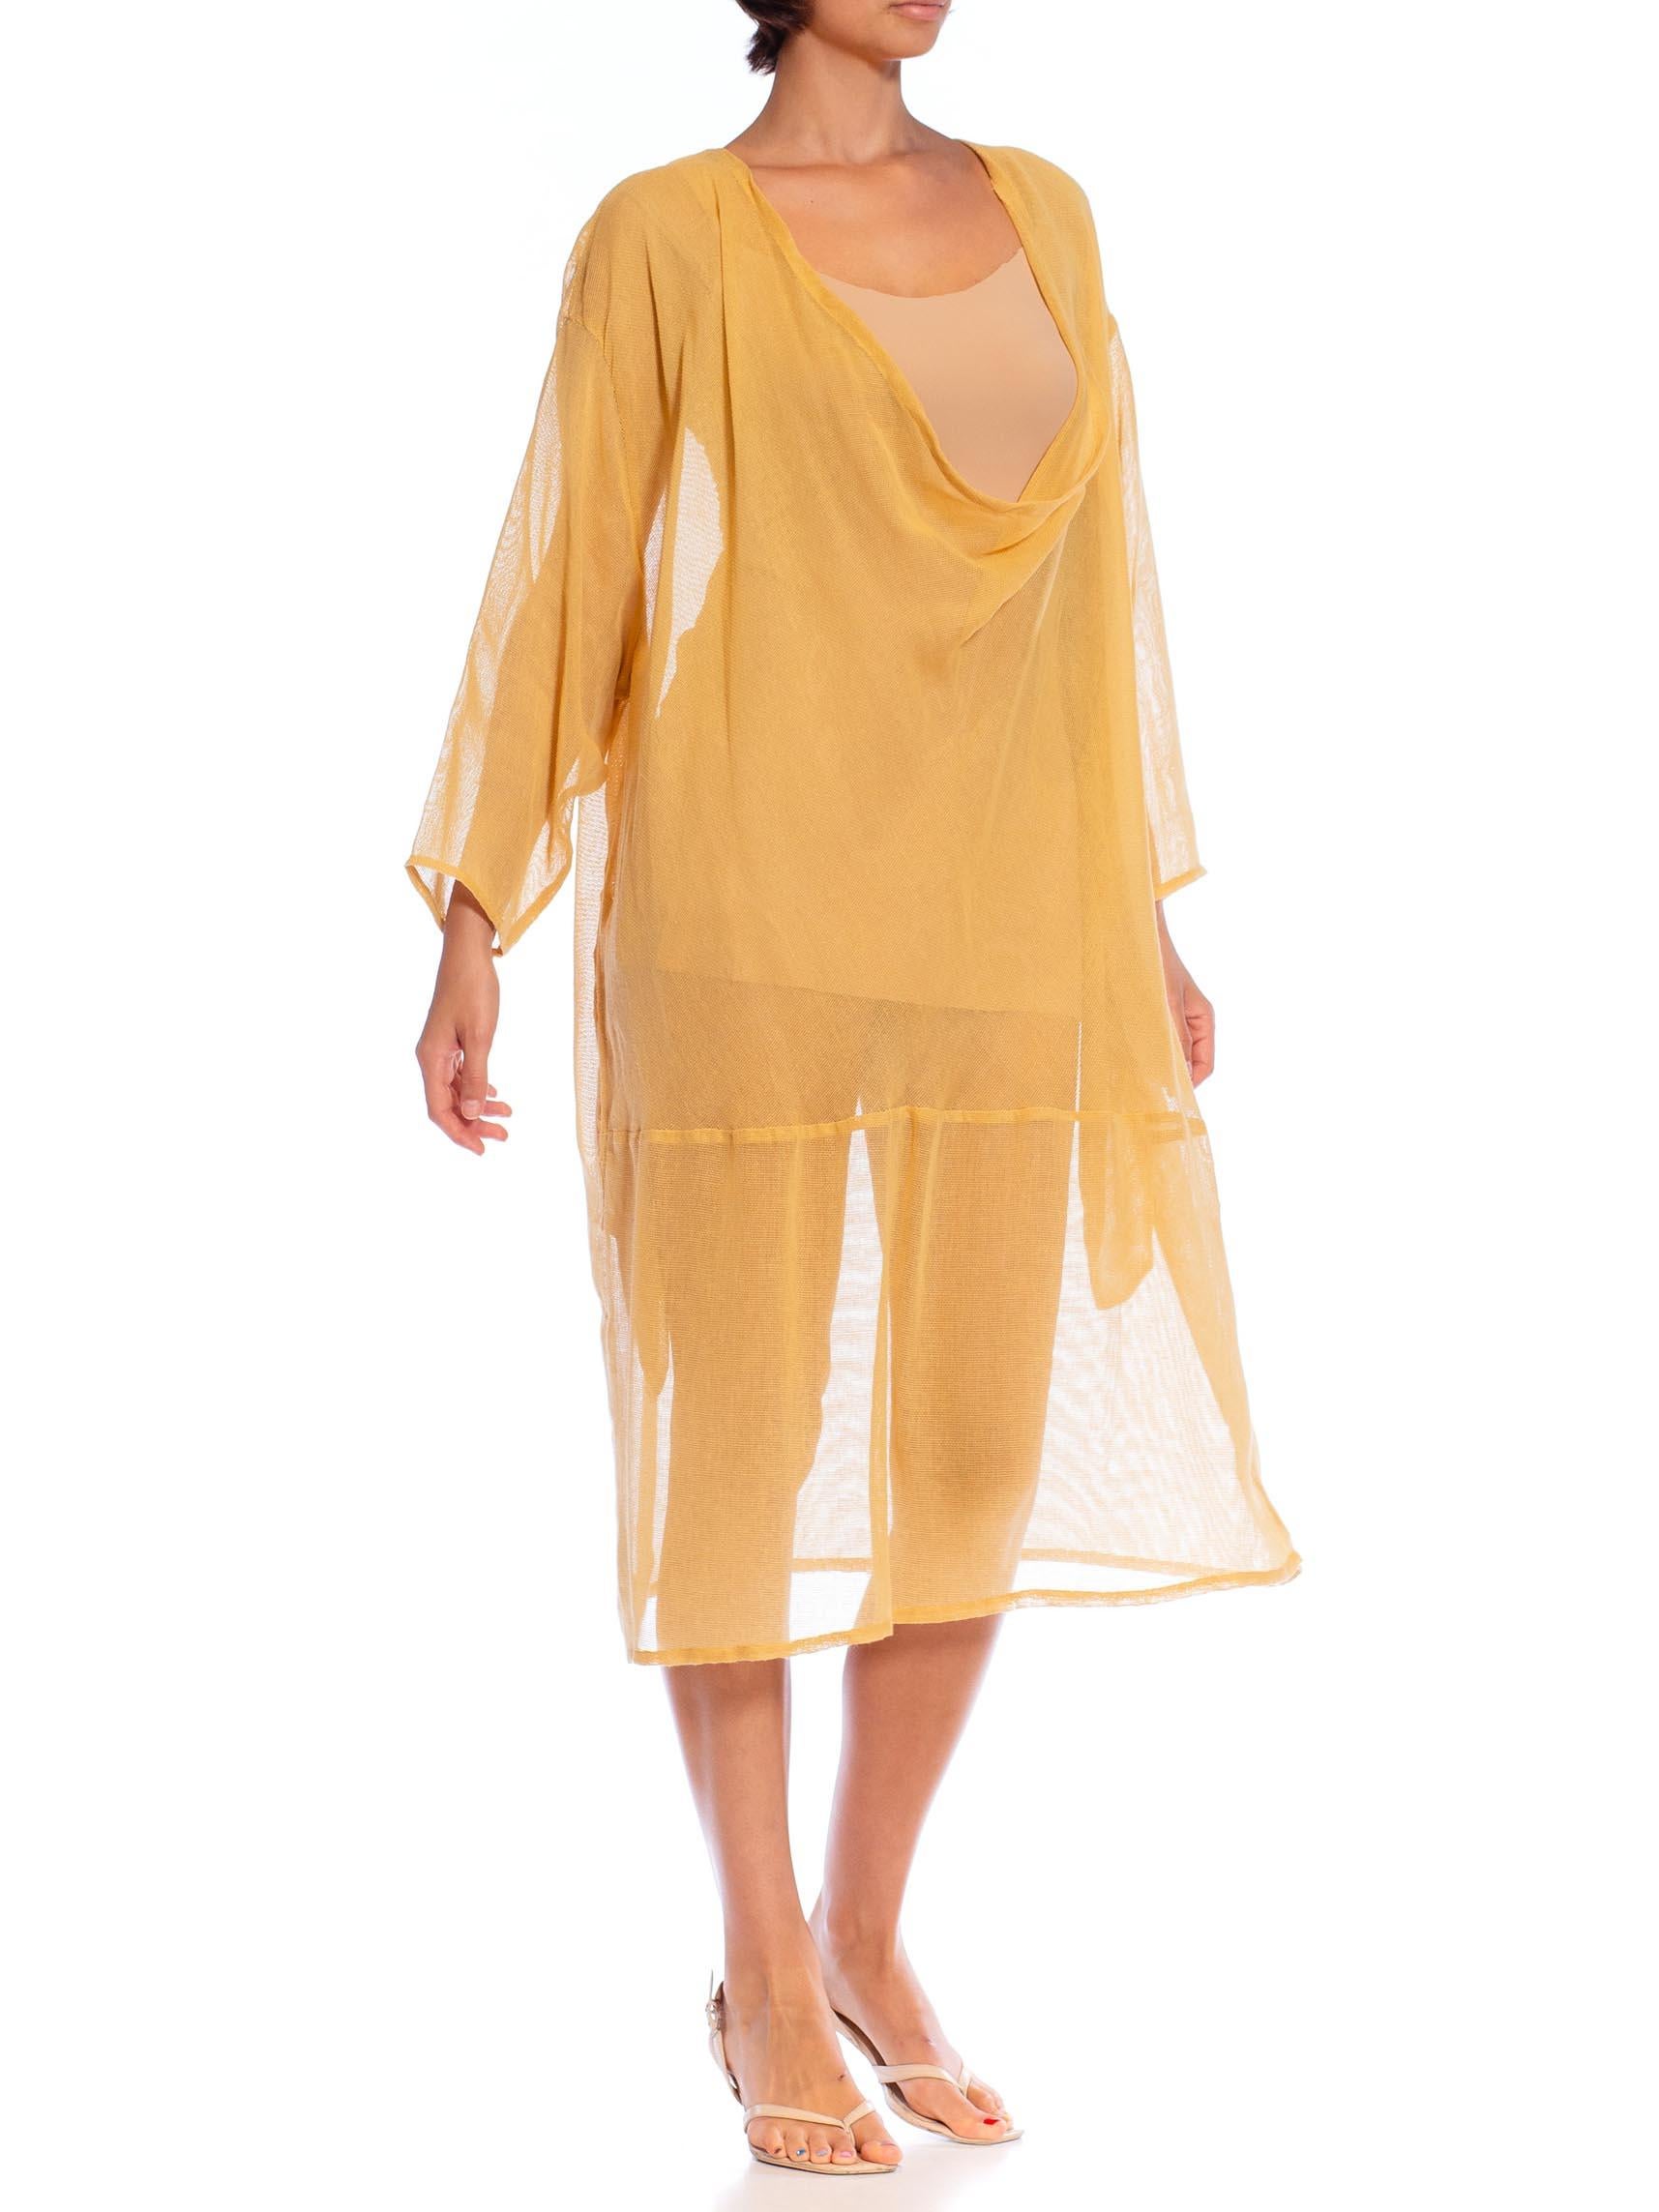 MORPHEW COLLECTION Mustard Yellow Cotton Blend Gauze Unisex Cowl-Neck Tunic Top In Excellent Condition For Sale In New York, NY